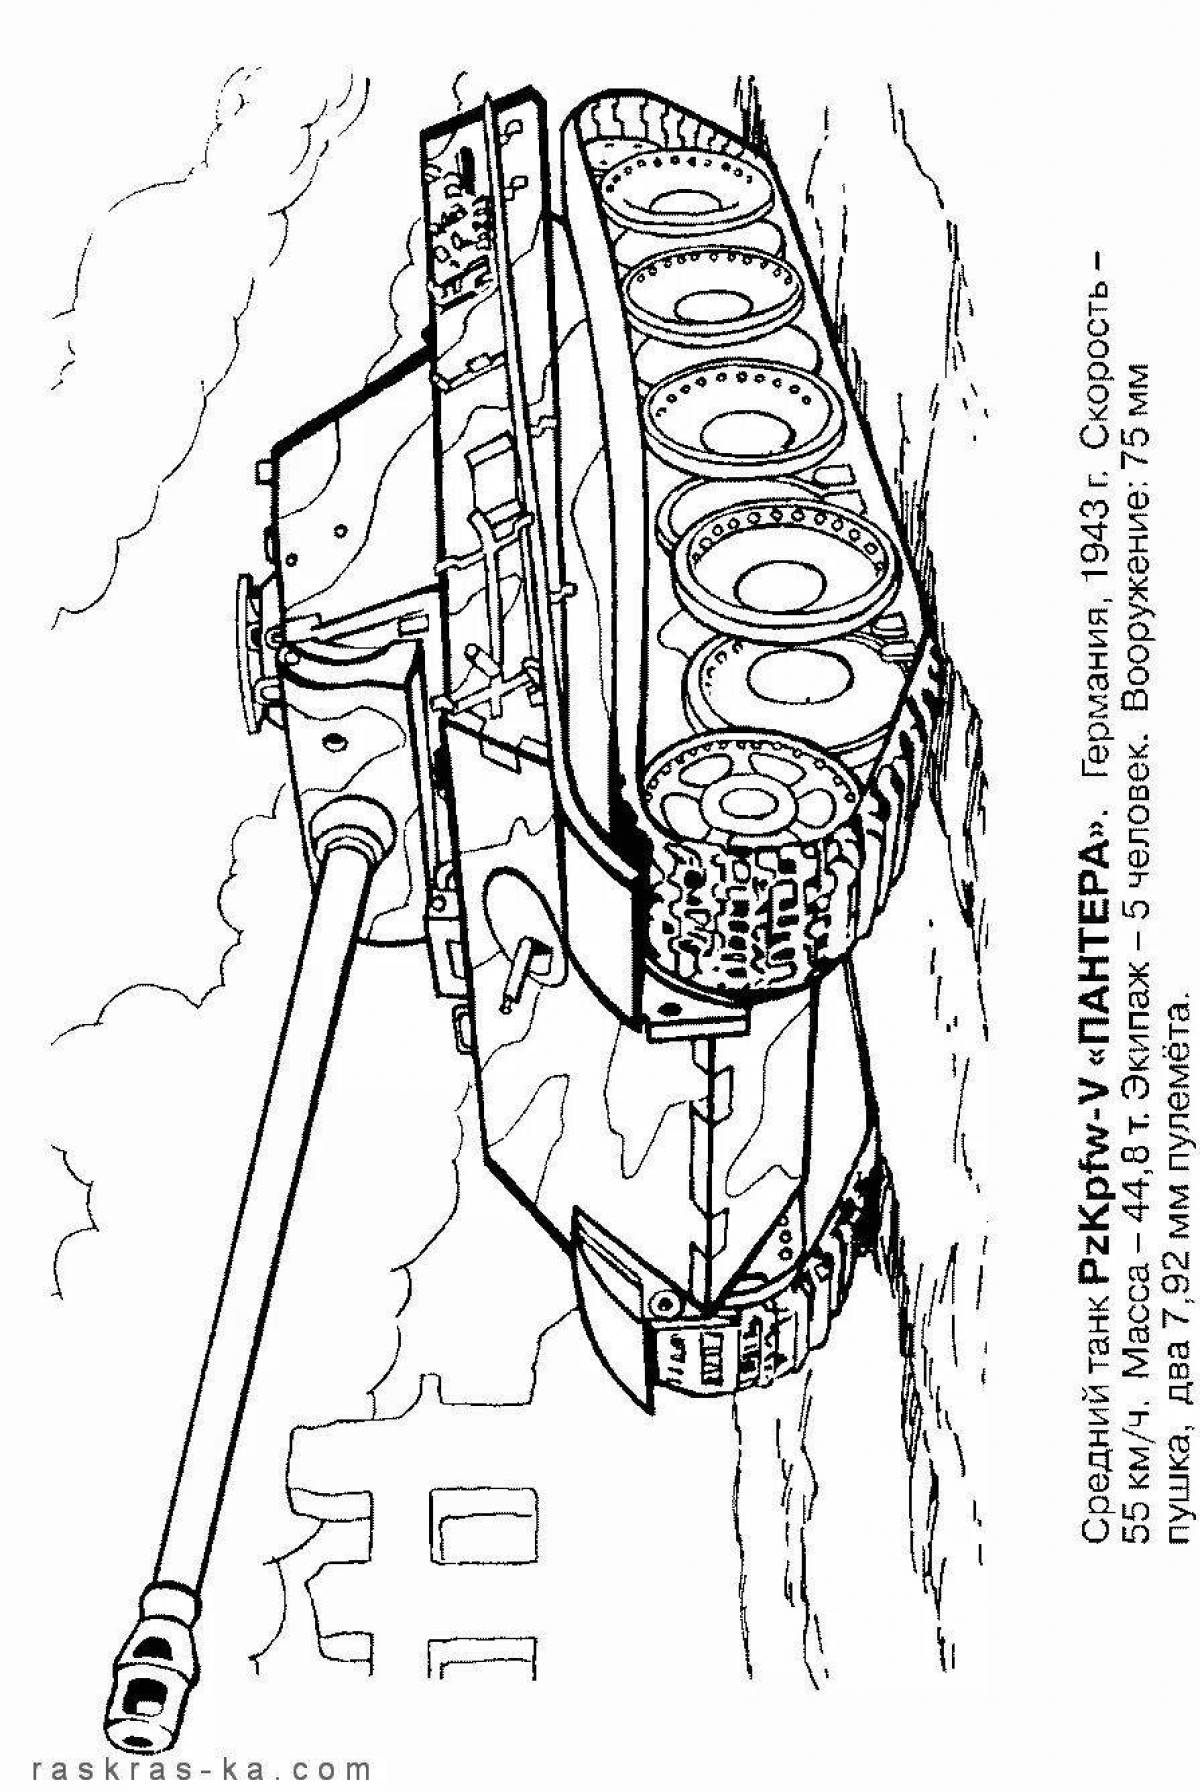 Panther tank amazing coloring page